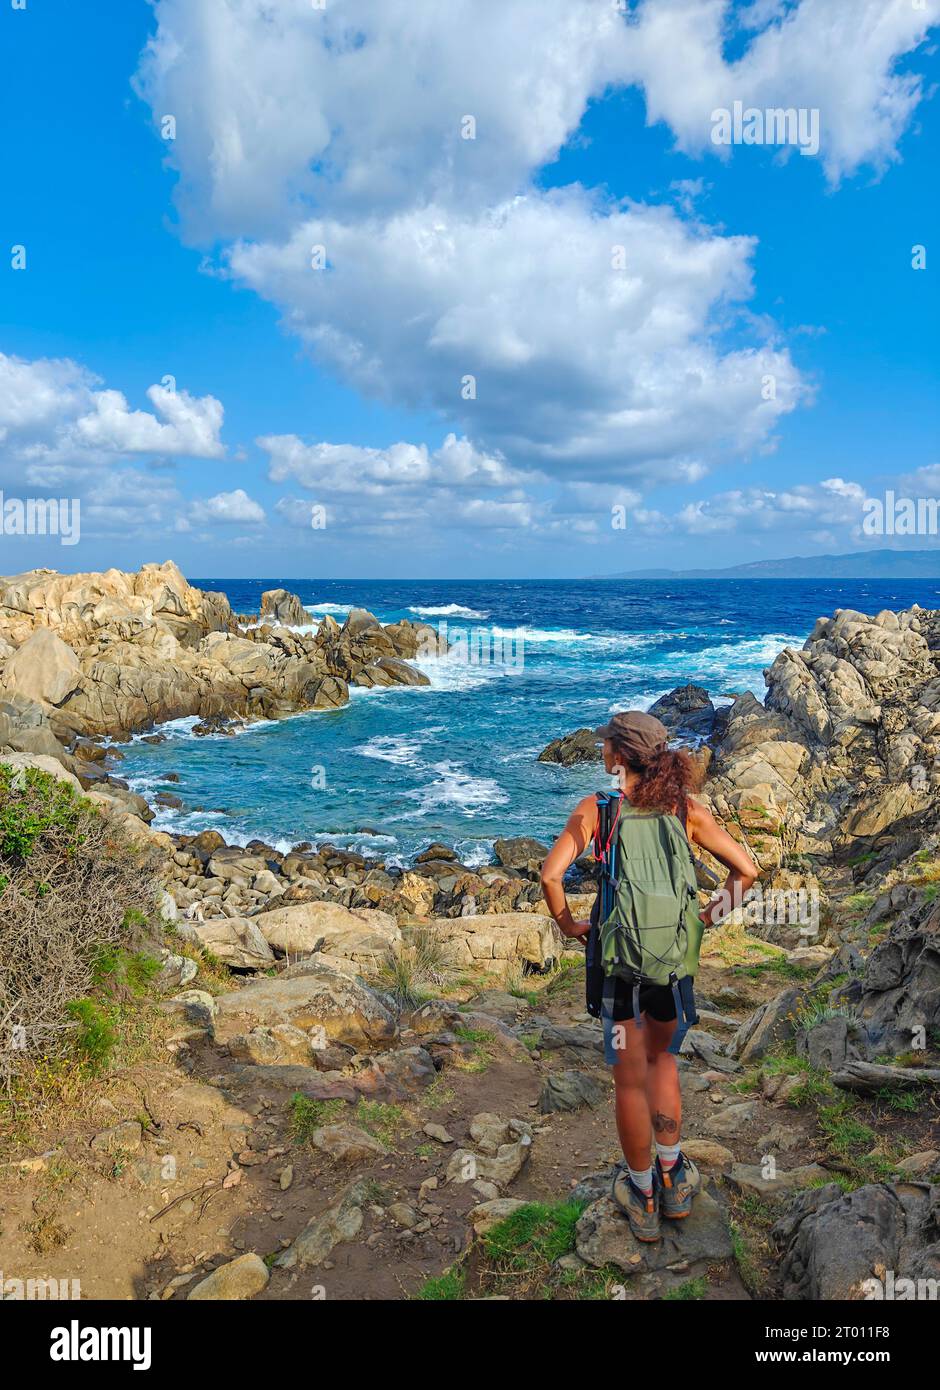 Corse (France) - Corsica is a big touristic french island in Mediterranean Sea, with beautiful beachs. Here the Sentier du littoral from Campomoro Stock Photo